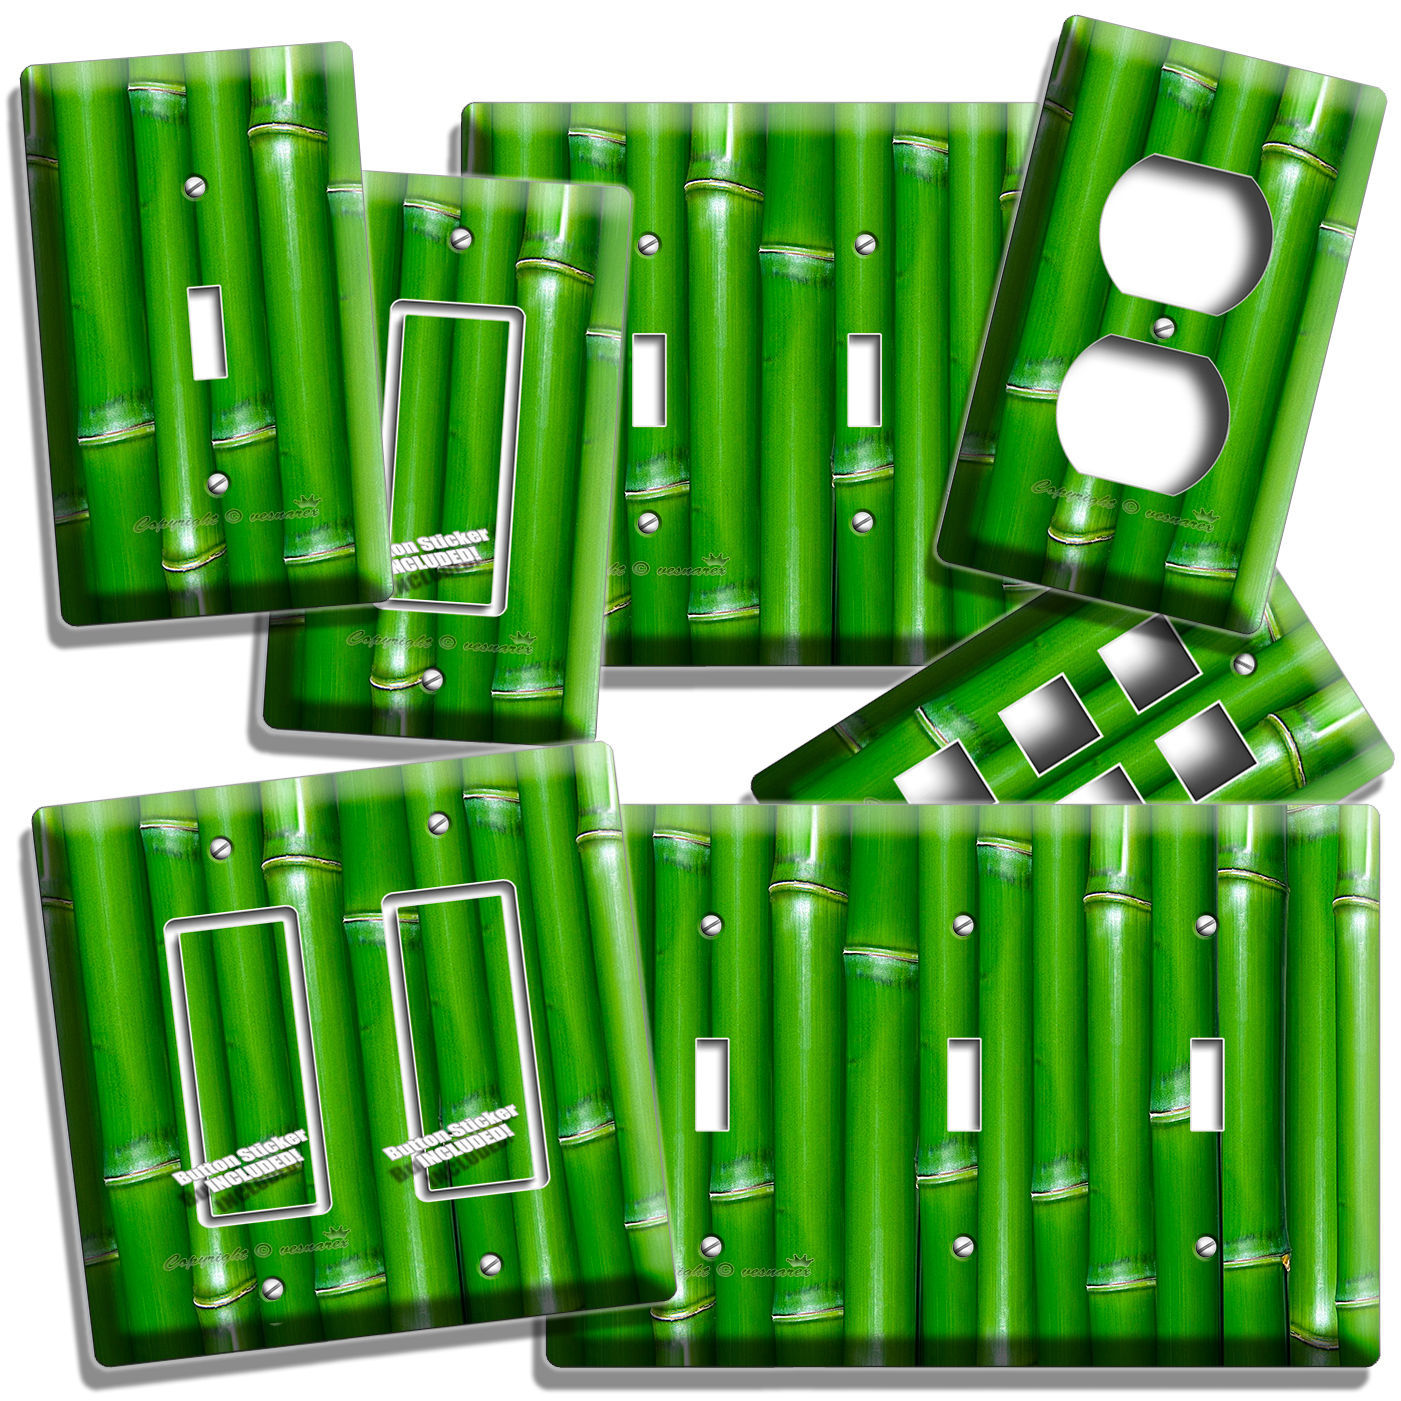 GREEN LUCKY BAMBOO LIGHTSWITCH OUTLET WALL PLATE ROOM HOME FENG SHUI HOUSE DECOR - £13.48 GBP - £21.73 GBP